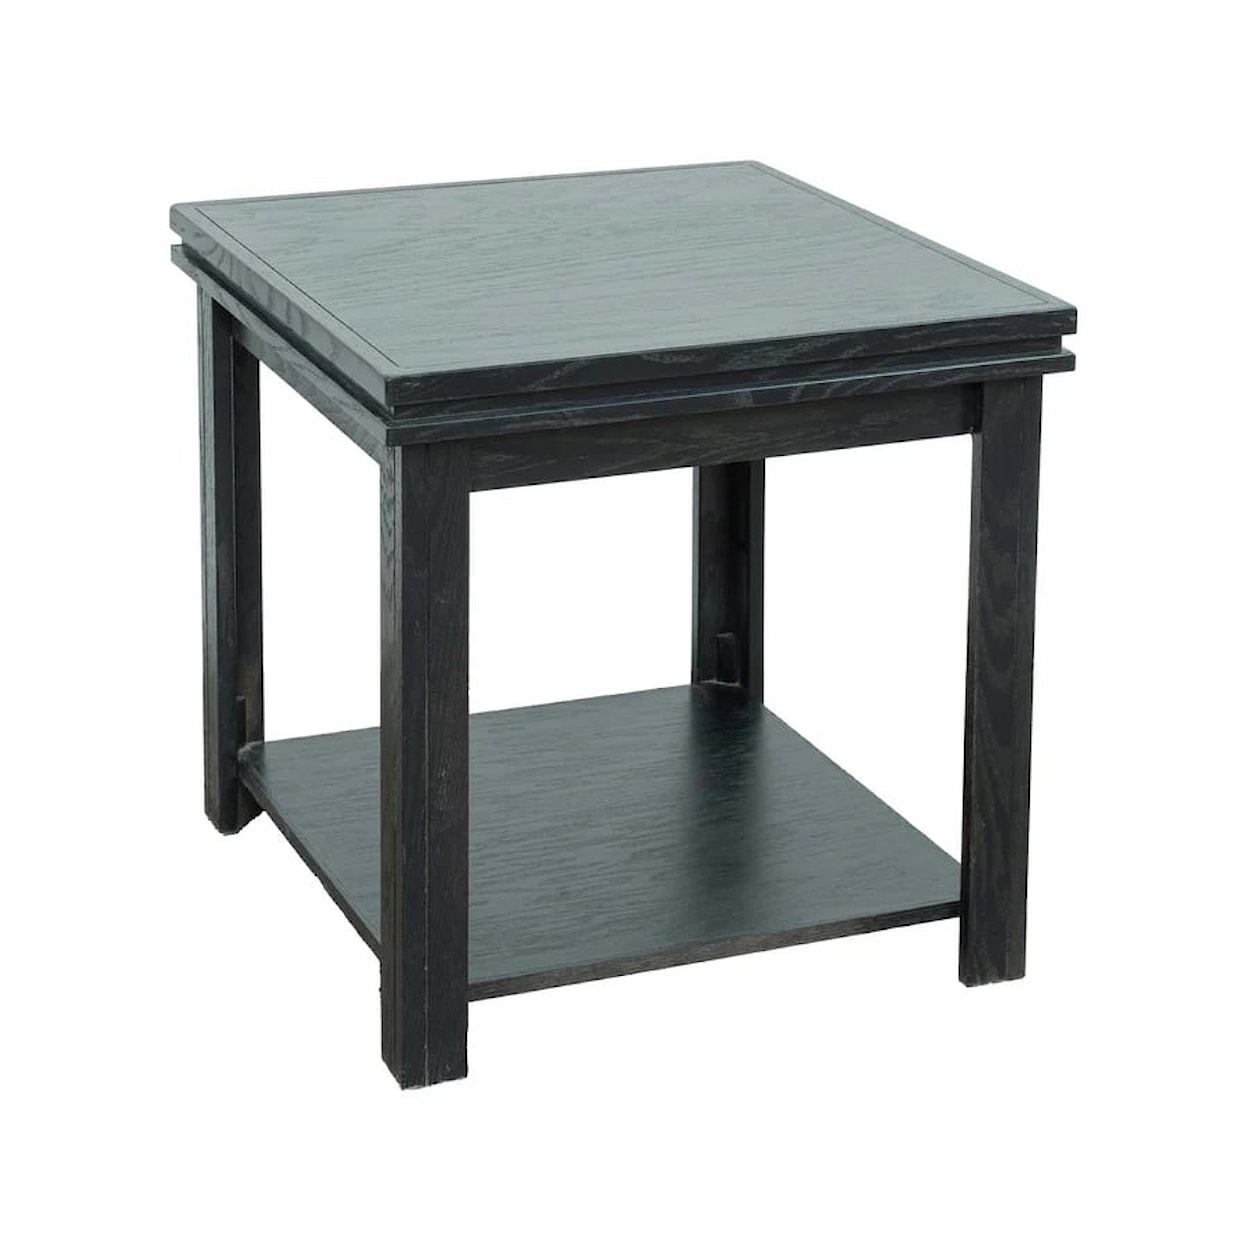 Legends Furniture Tybee End Table